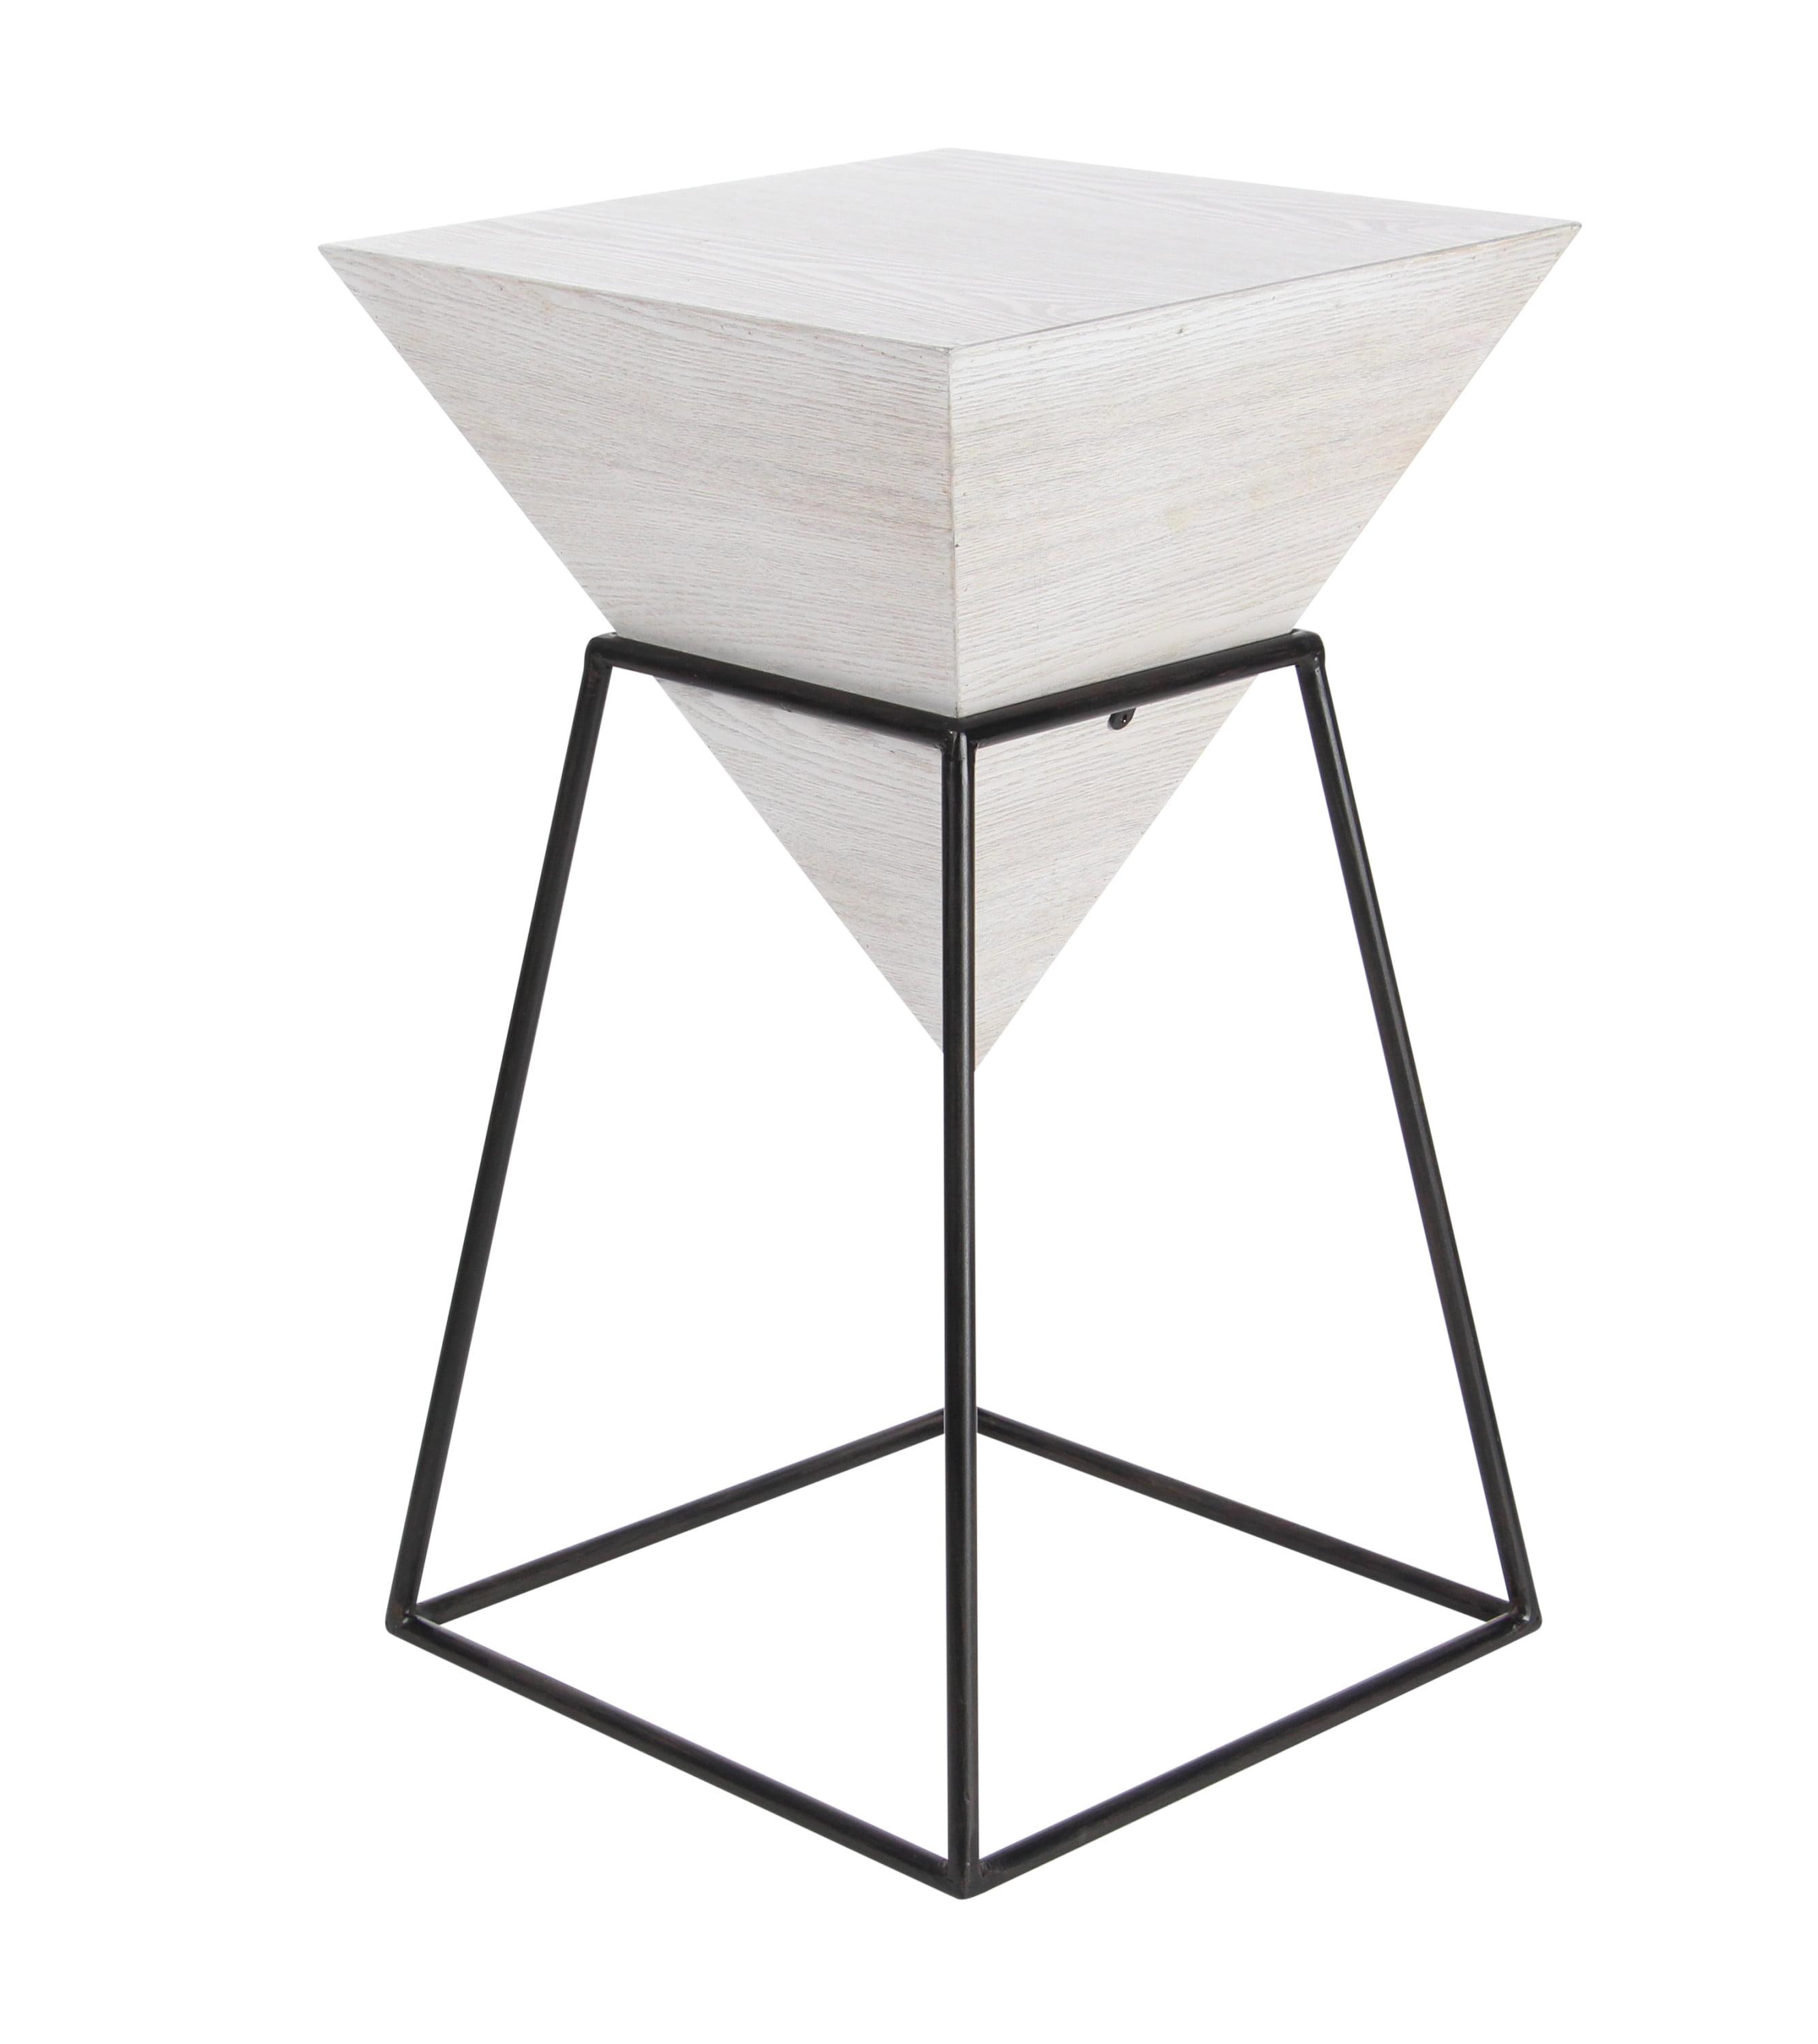 Triangular Wood and Metal Accent Table with White Top